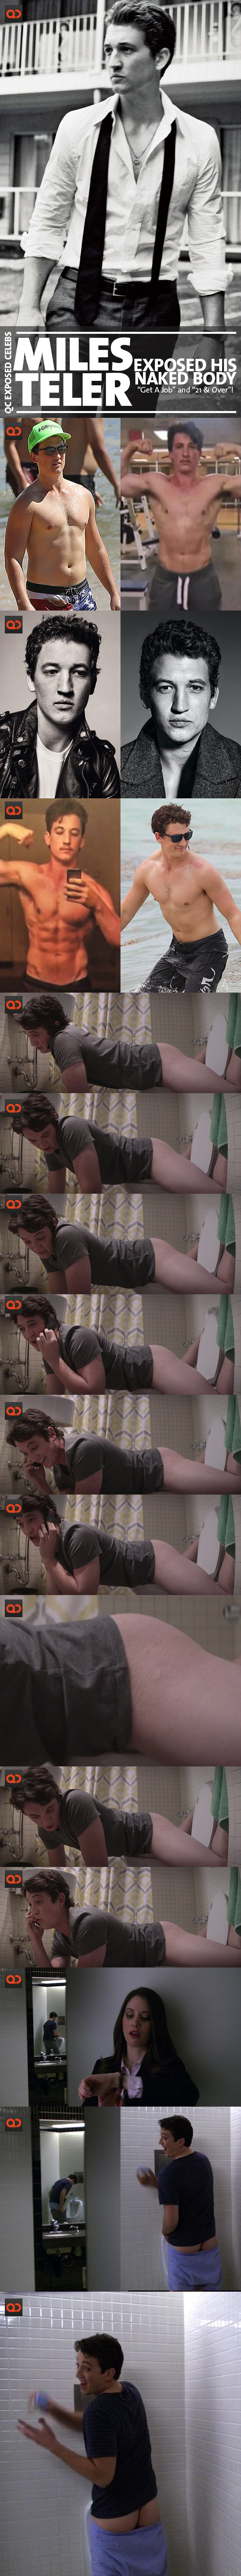 qc-miles_teller_naked_body_21_and_over_get_a_job-collage01